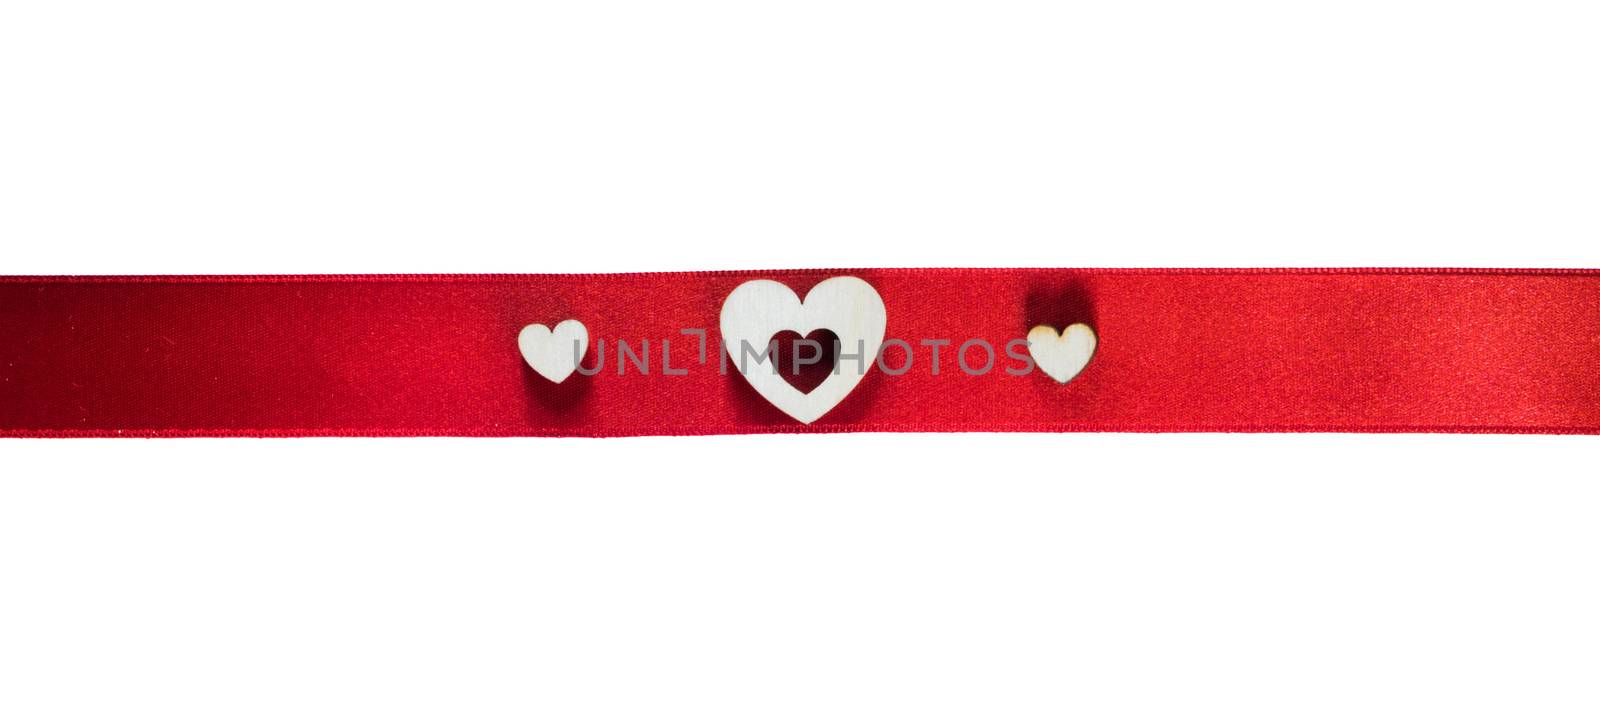 Red satin ribbon with wooden heart shape decor isolated on white background